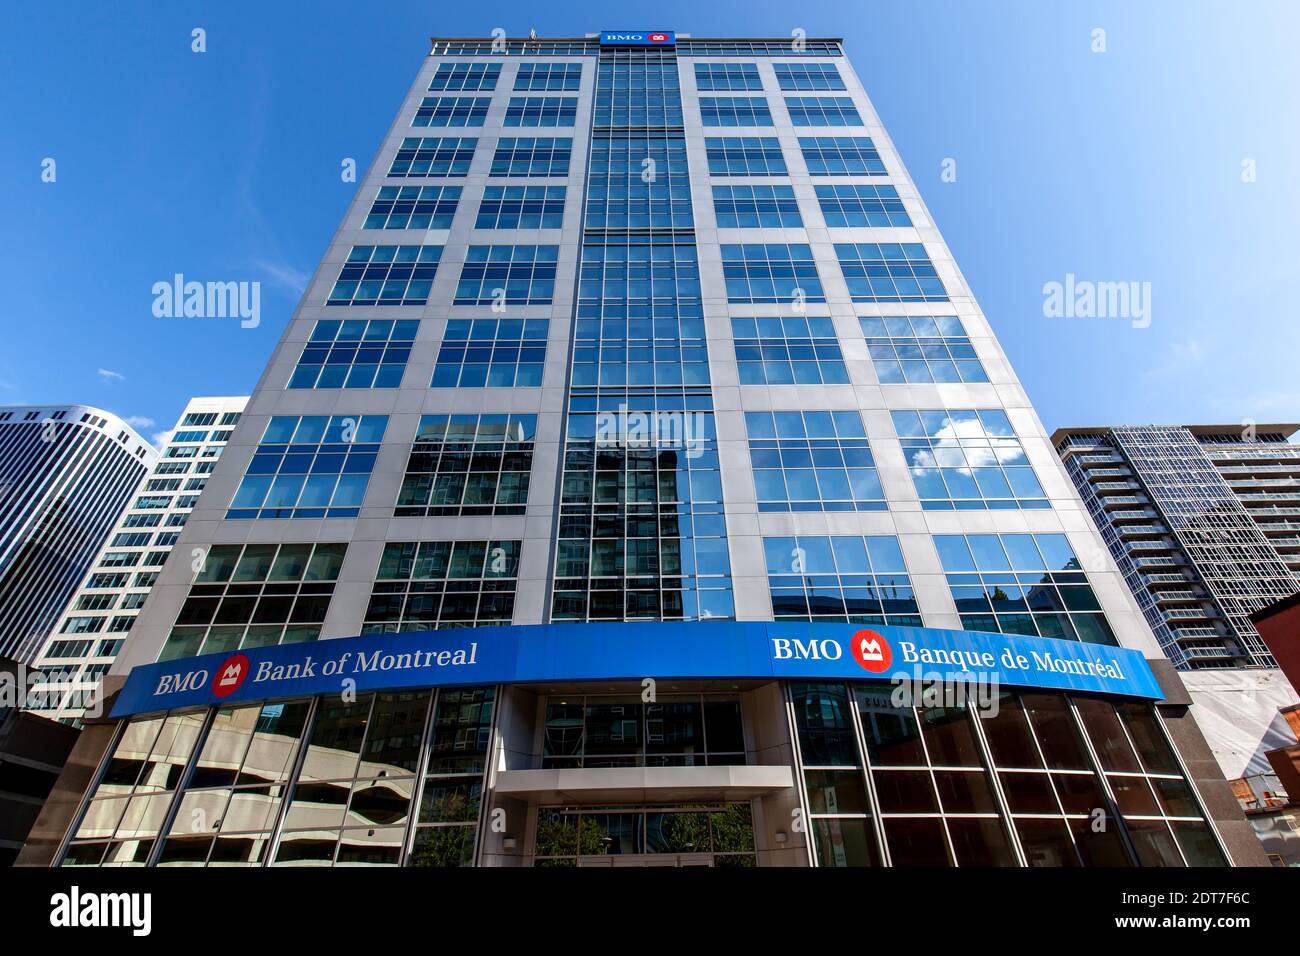 BMO Bank of Montreal sign on BMO Capital Center building in Ottawa Canada. Stock Photo